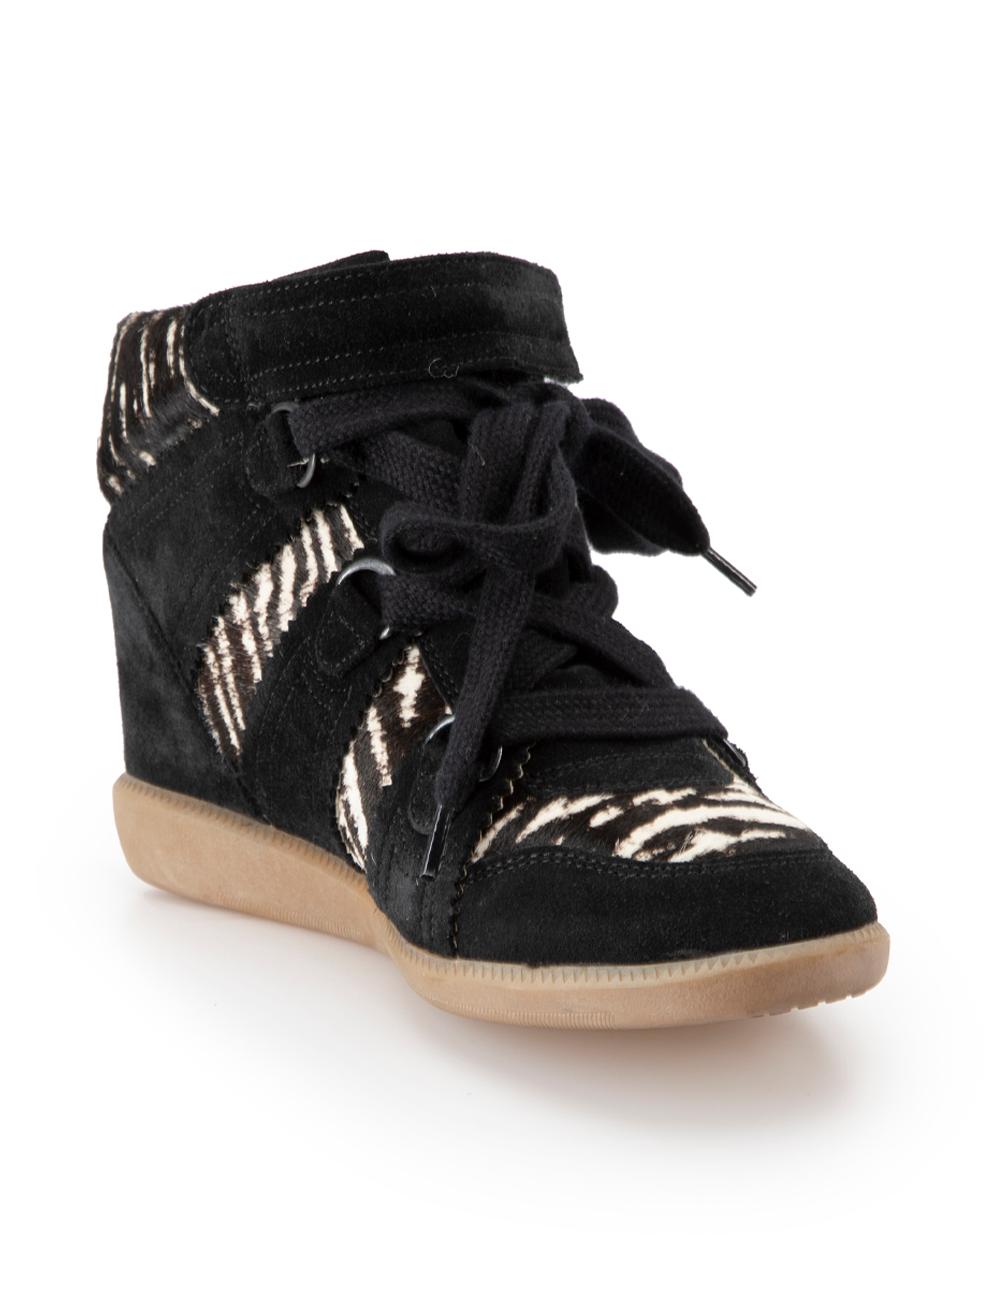 CONDITION is Very good. Minimal wear to shoes is evident. Minimal wear to the heels of both with faint scuff marks on this used Isabel Marant designer resale item. These shoes come with original box and dust bag.



Details


Black

Suede and